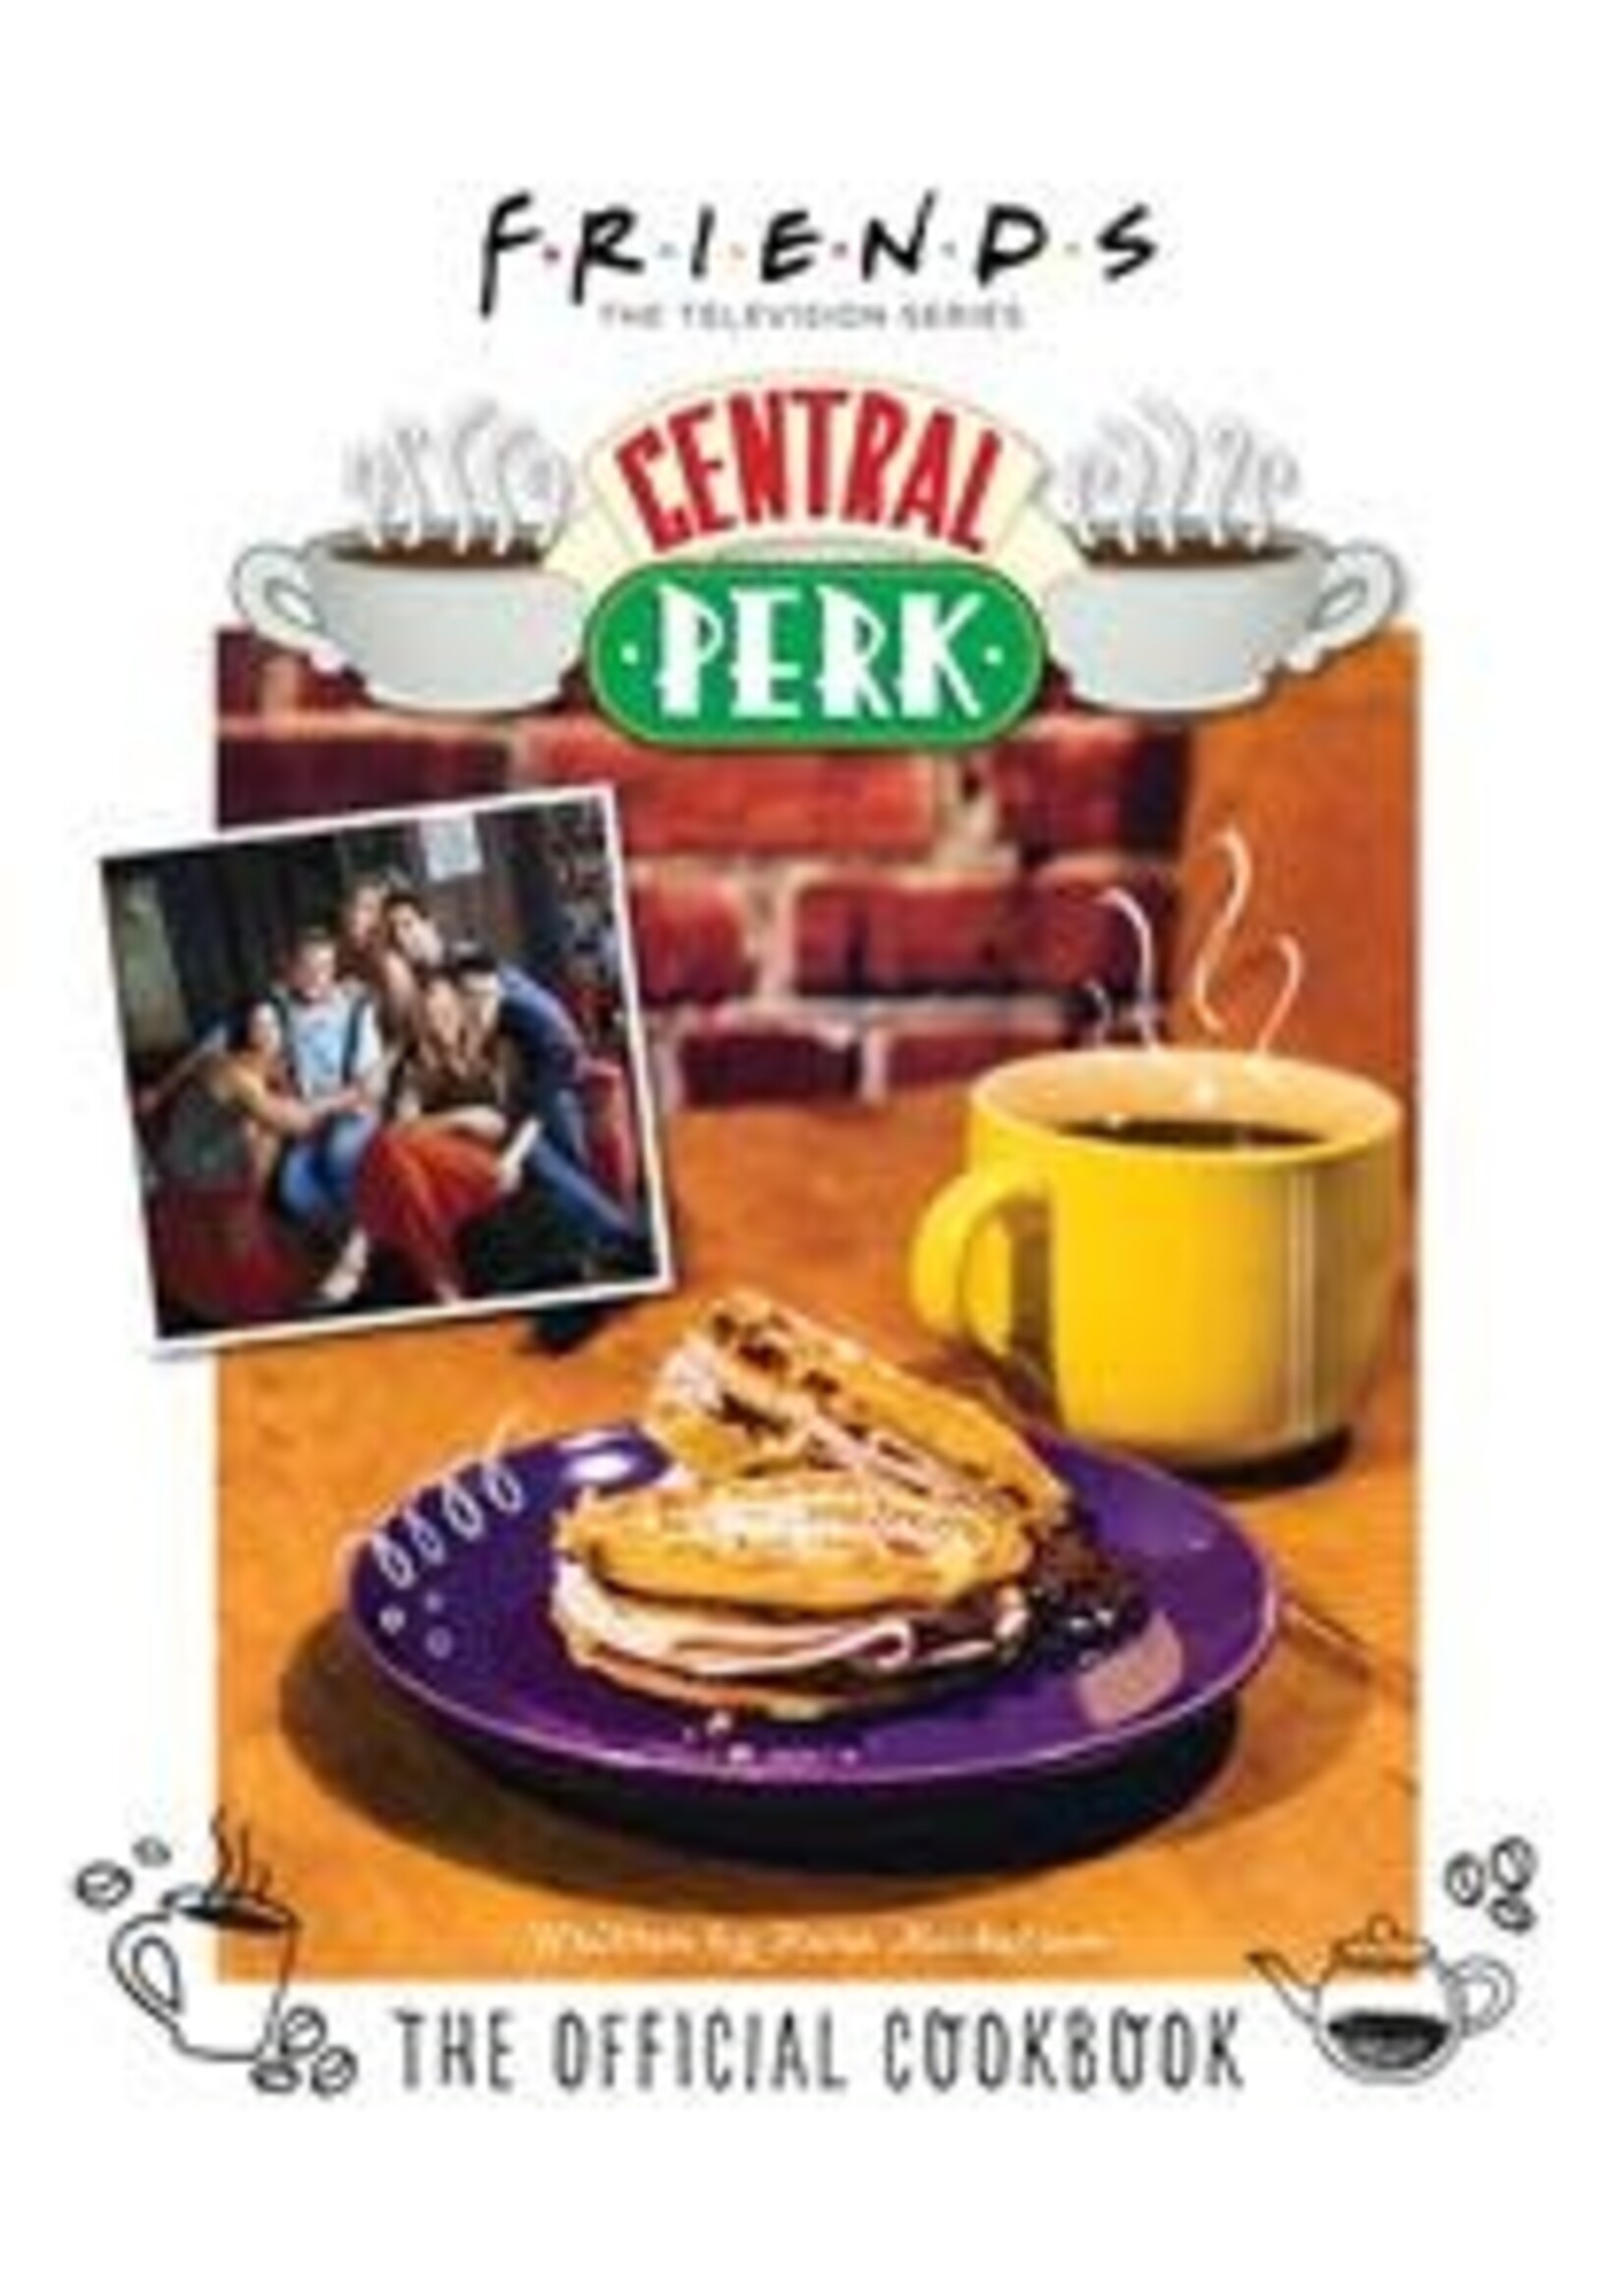 Friends: The Official Central Perk Cookbook (Classic TV Cookbooks, 90s TV) by Kara Mickelson